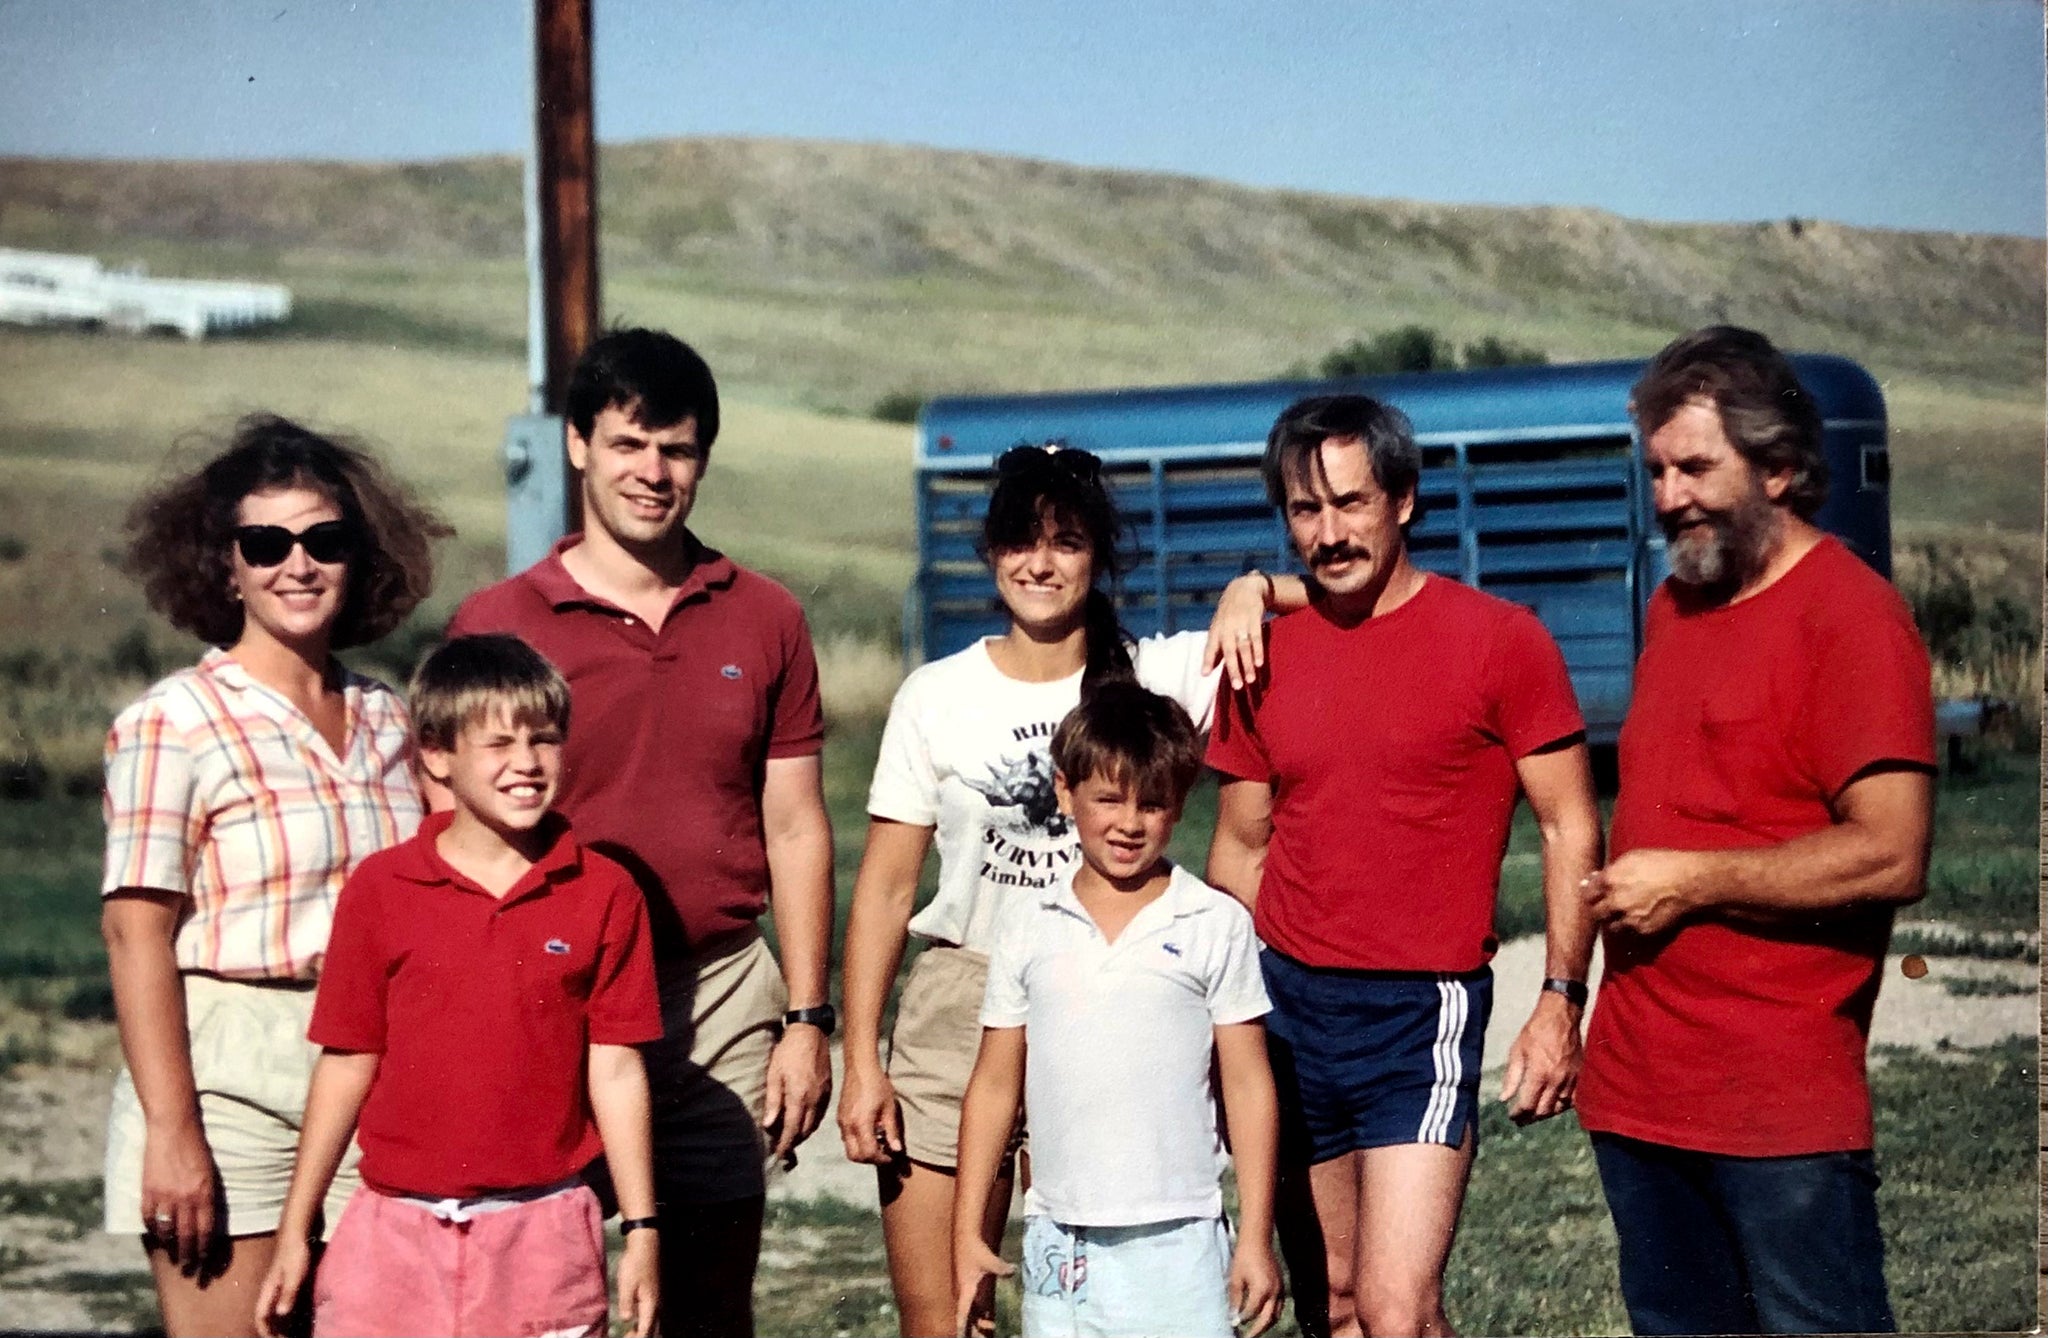 Erney, Dan, and Others in the 1970s